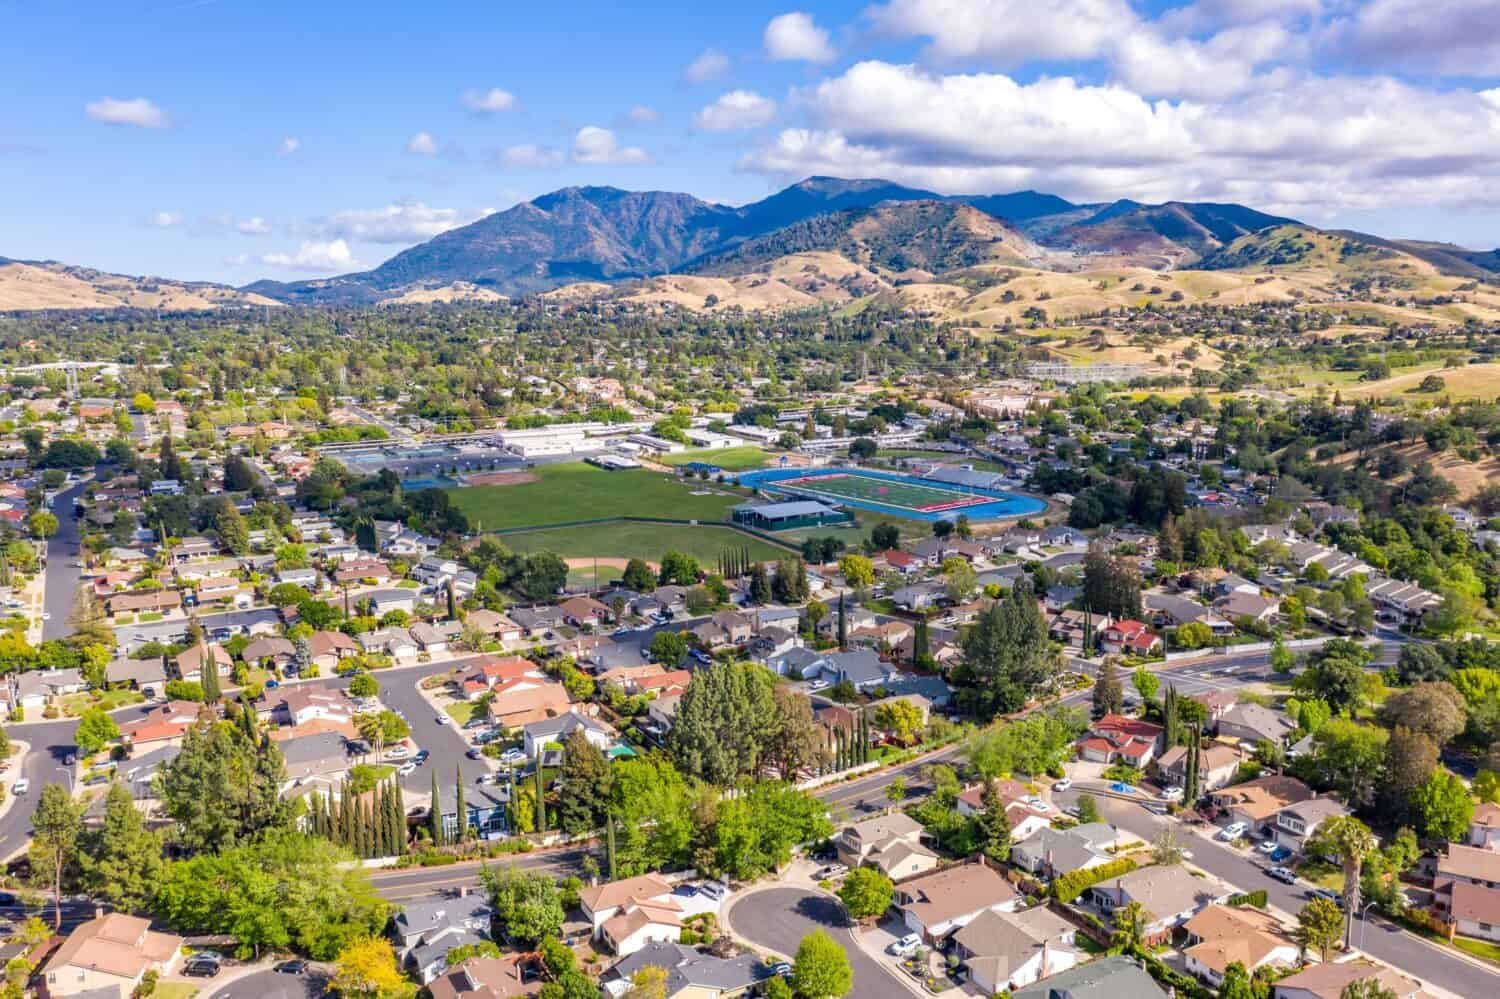 Aerial photo over the city of Concord, California with houses in the foreground and green trees with Mt.Diablo in the background and a blue sky